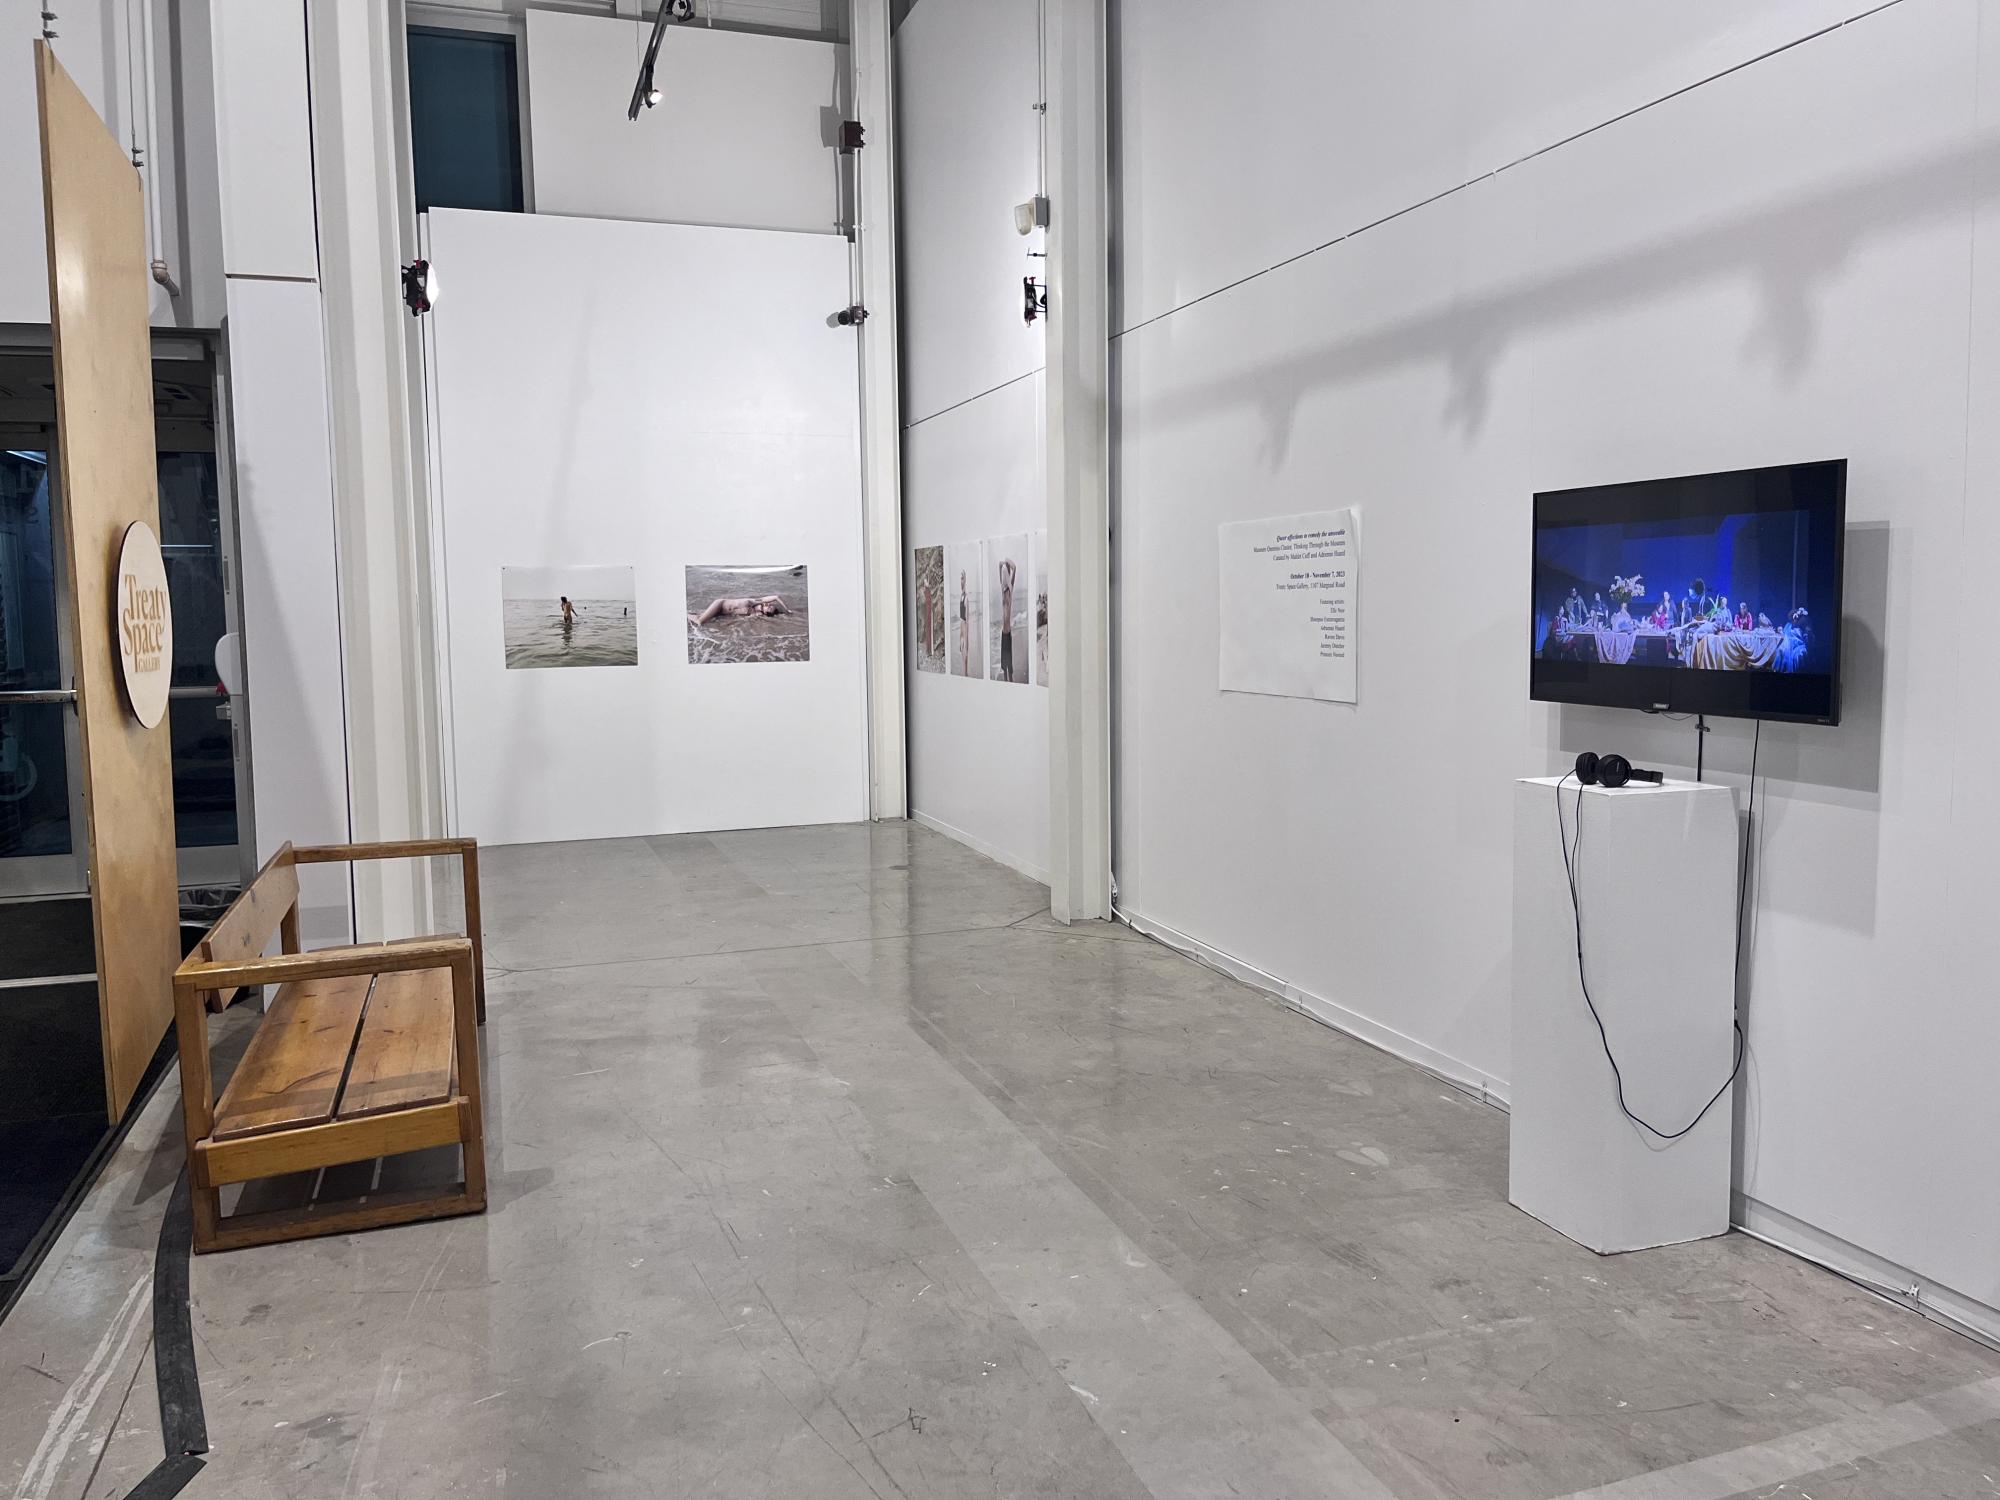 [ID: "Wide shot of the NSCAD Treaty Space Gallery. In the foreground there is a wooden bench, a TV mounted to the wall, and headphones on a plinth. In the background there are various photos by artist Princex Naveed."]